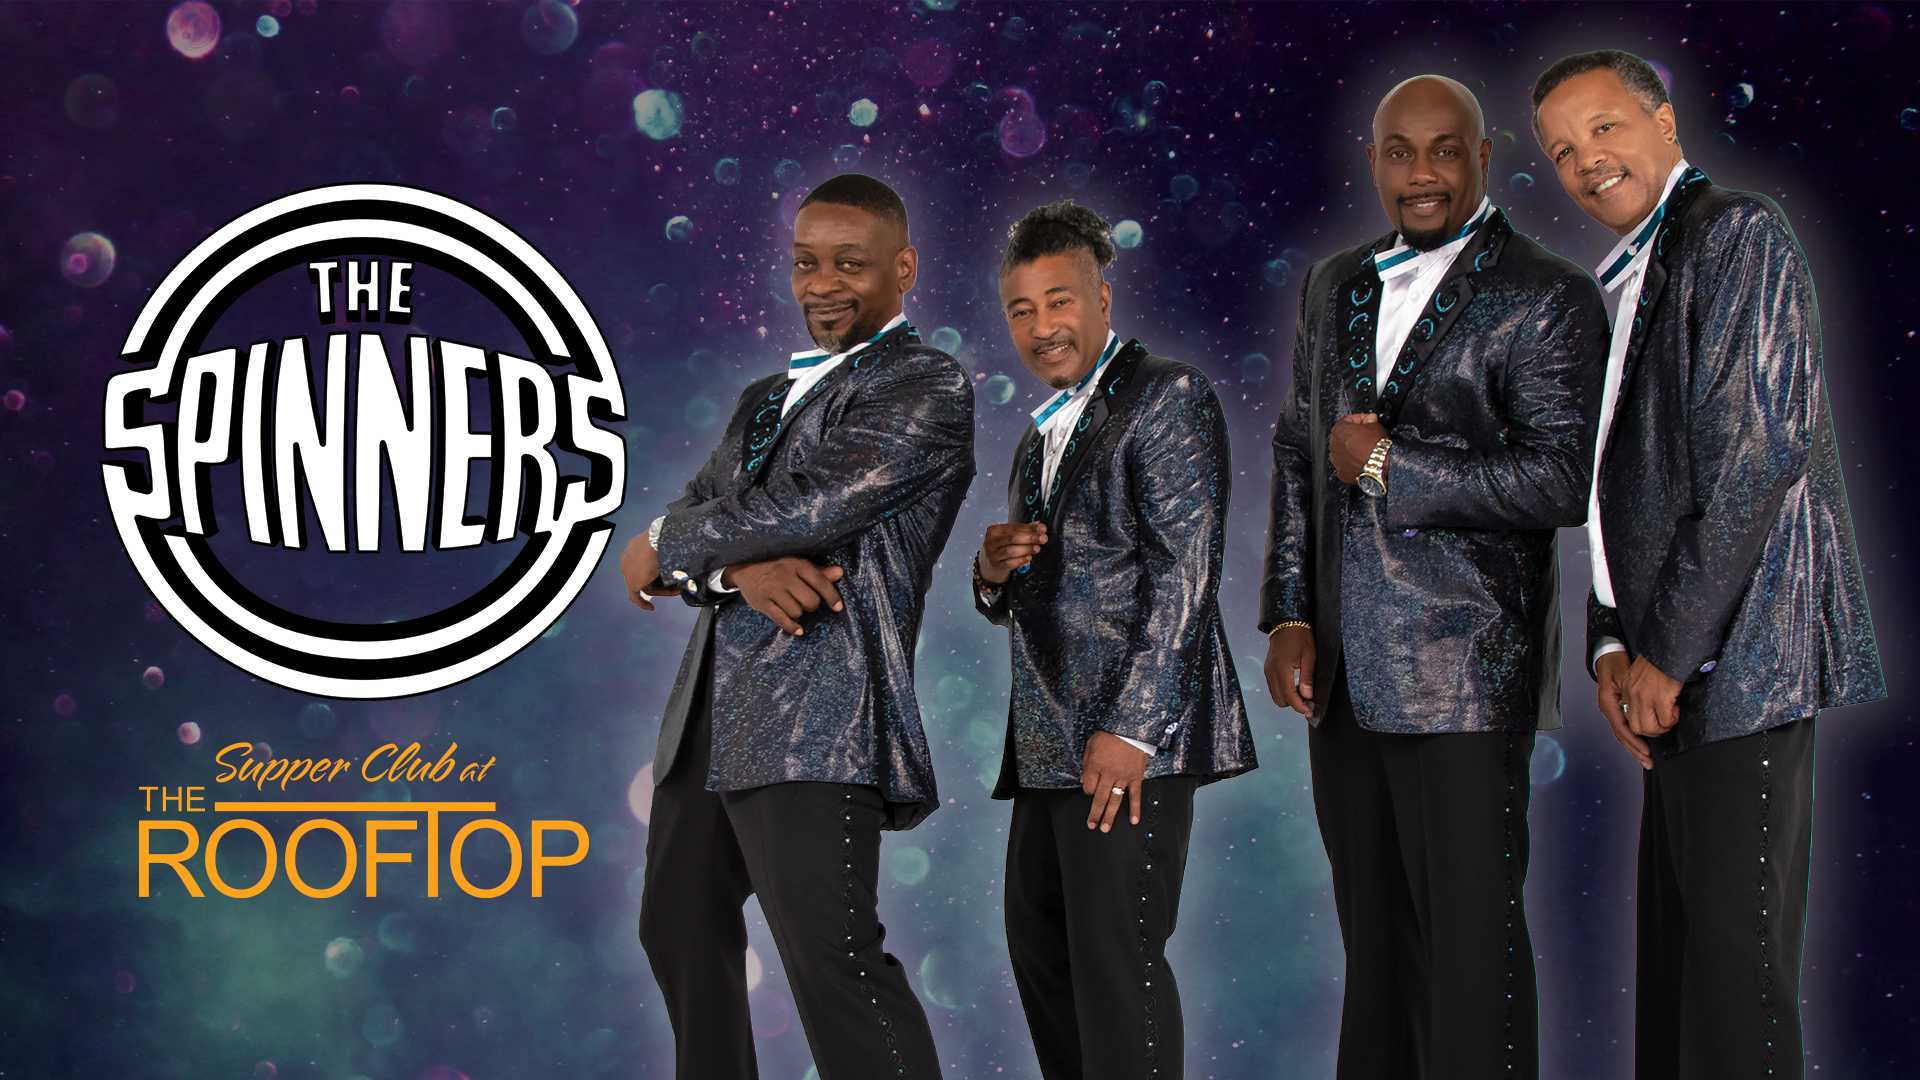 The Spinners - Supper Club at the Rooftop